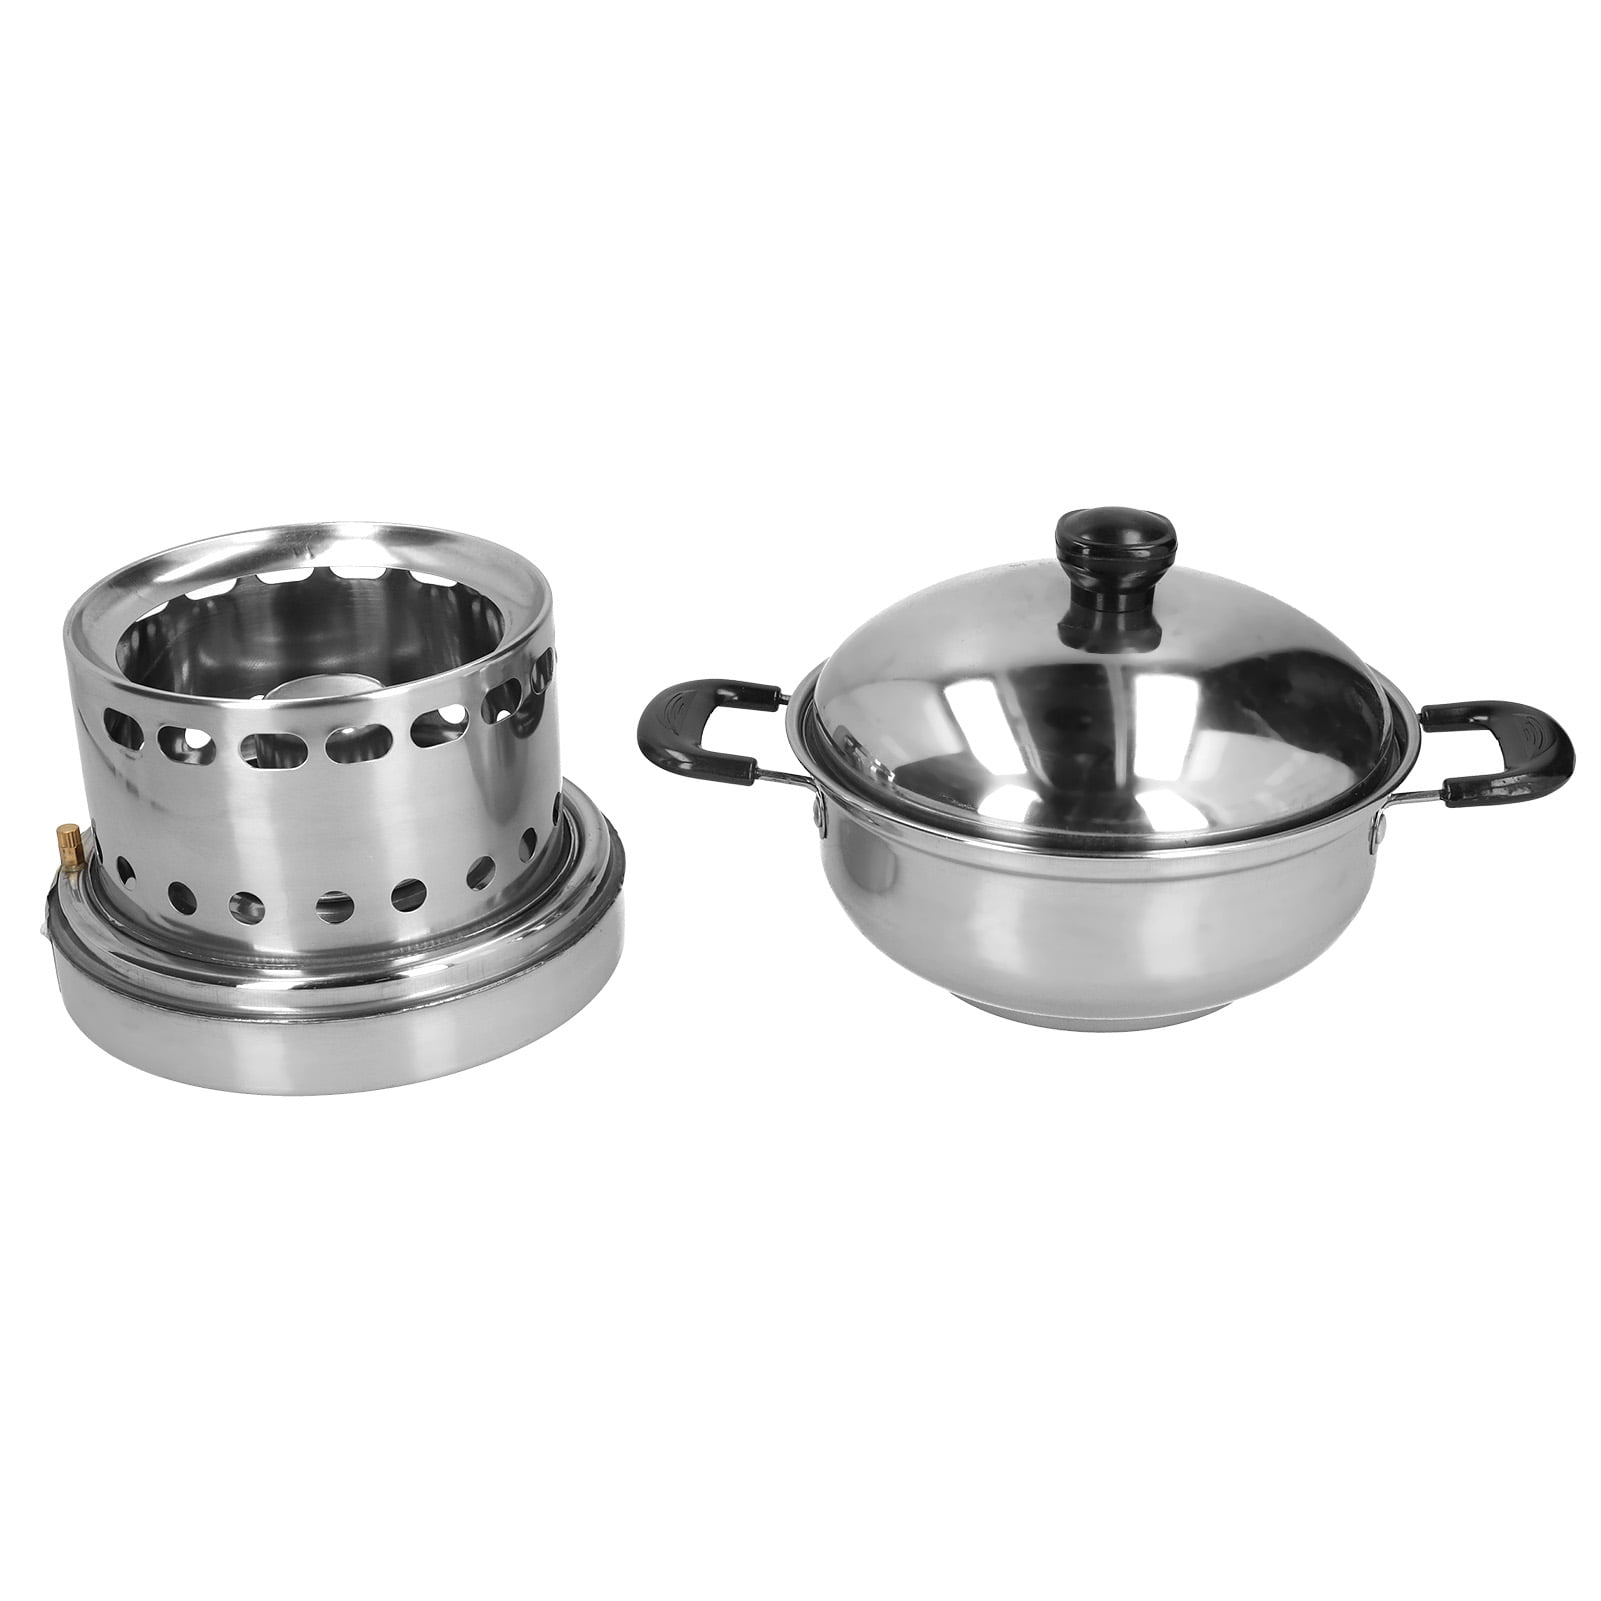 Details about   Stainless Steel Hot Pot Anti‑Scalding Handle Firm Easy To Clean Stainless Steel 